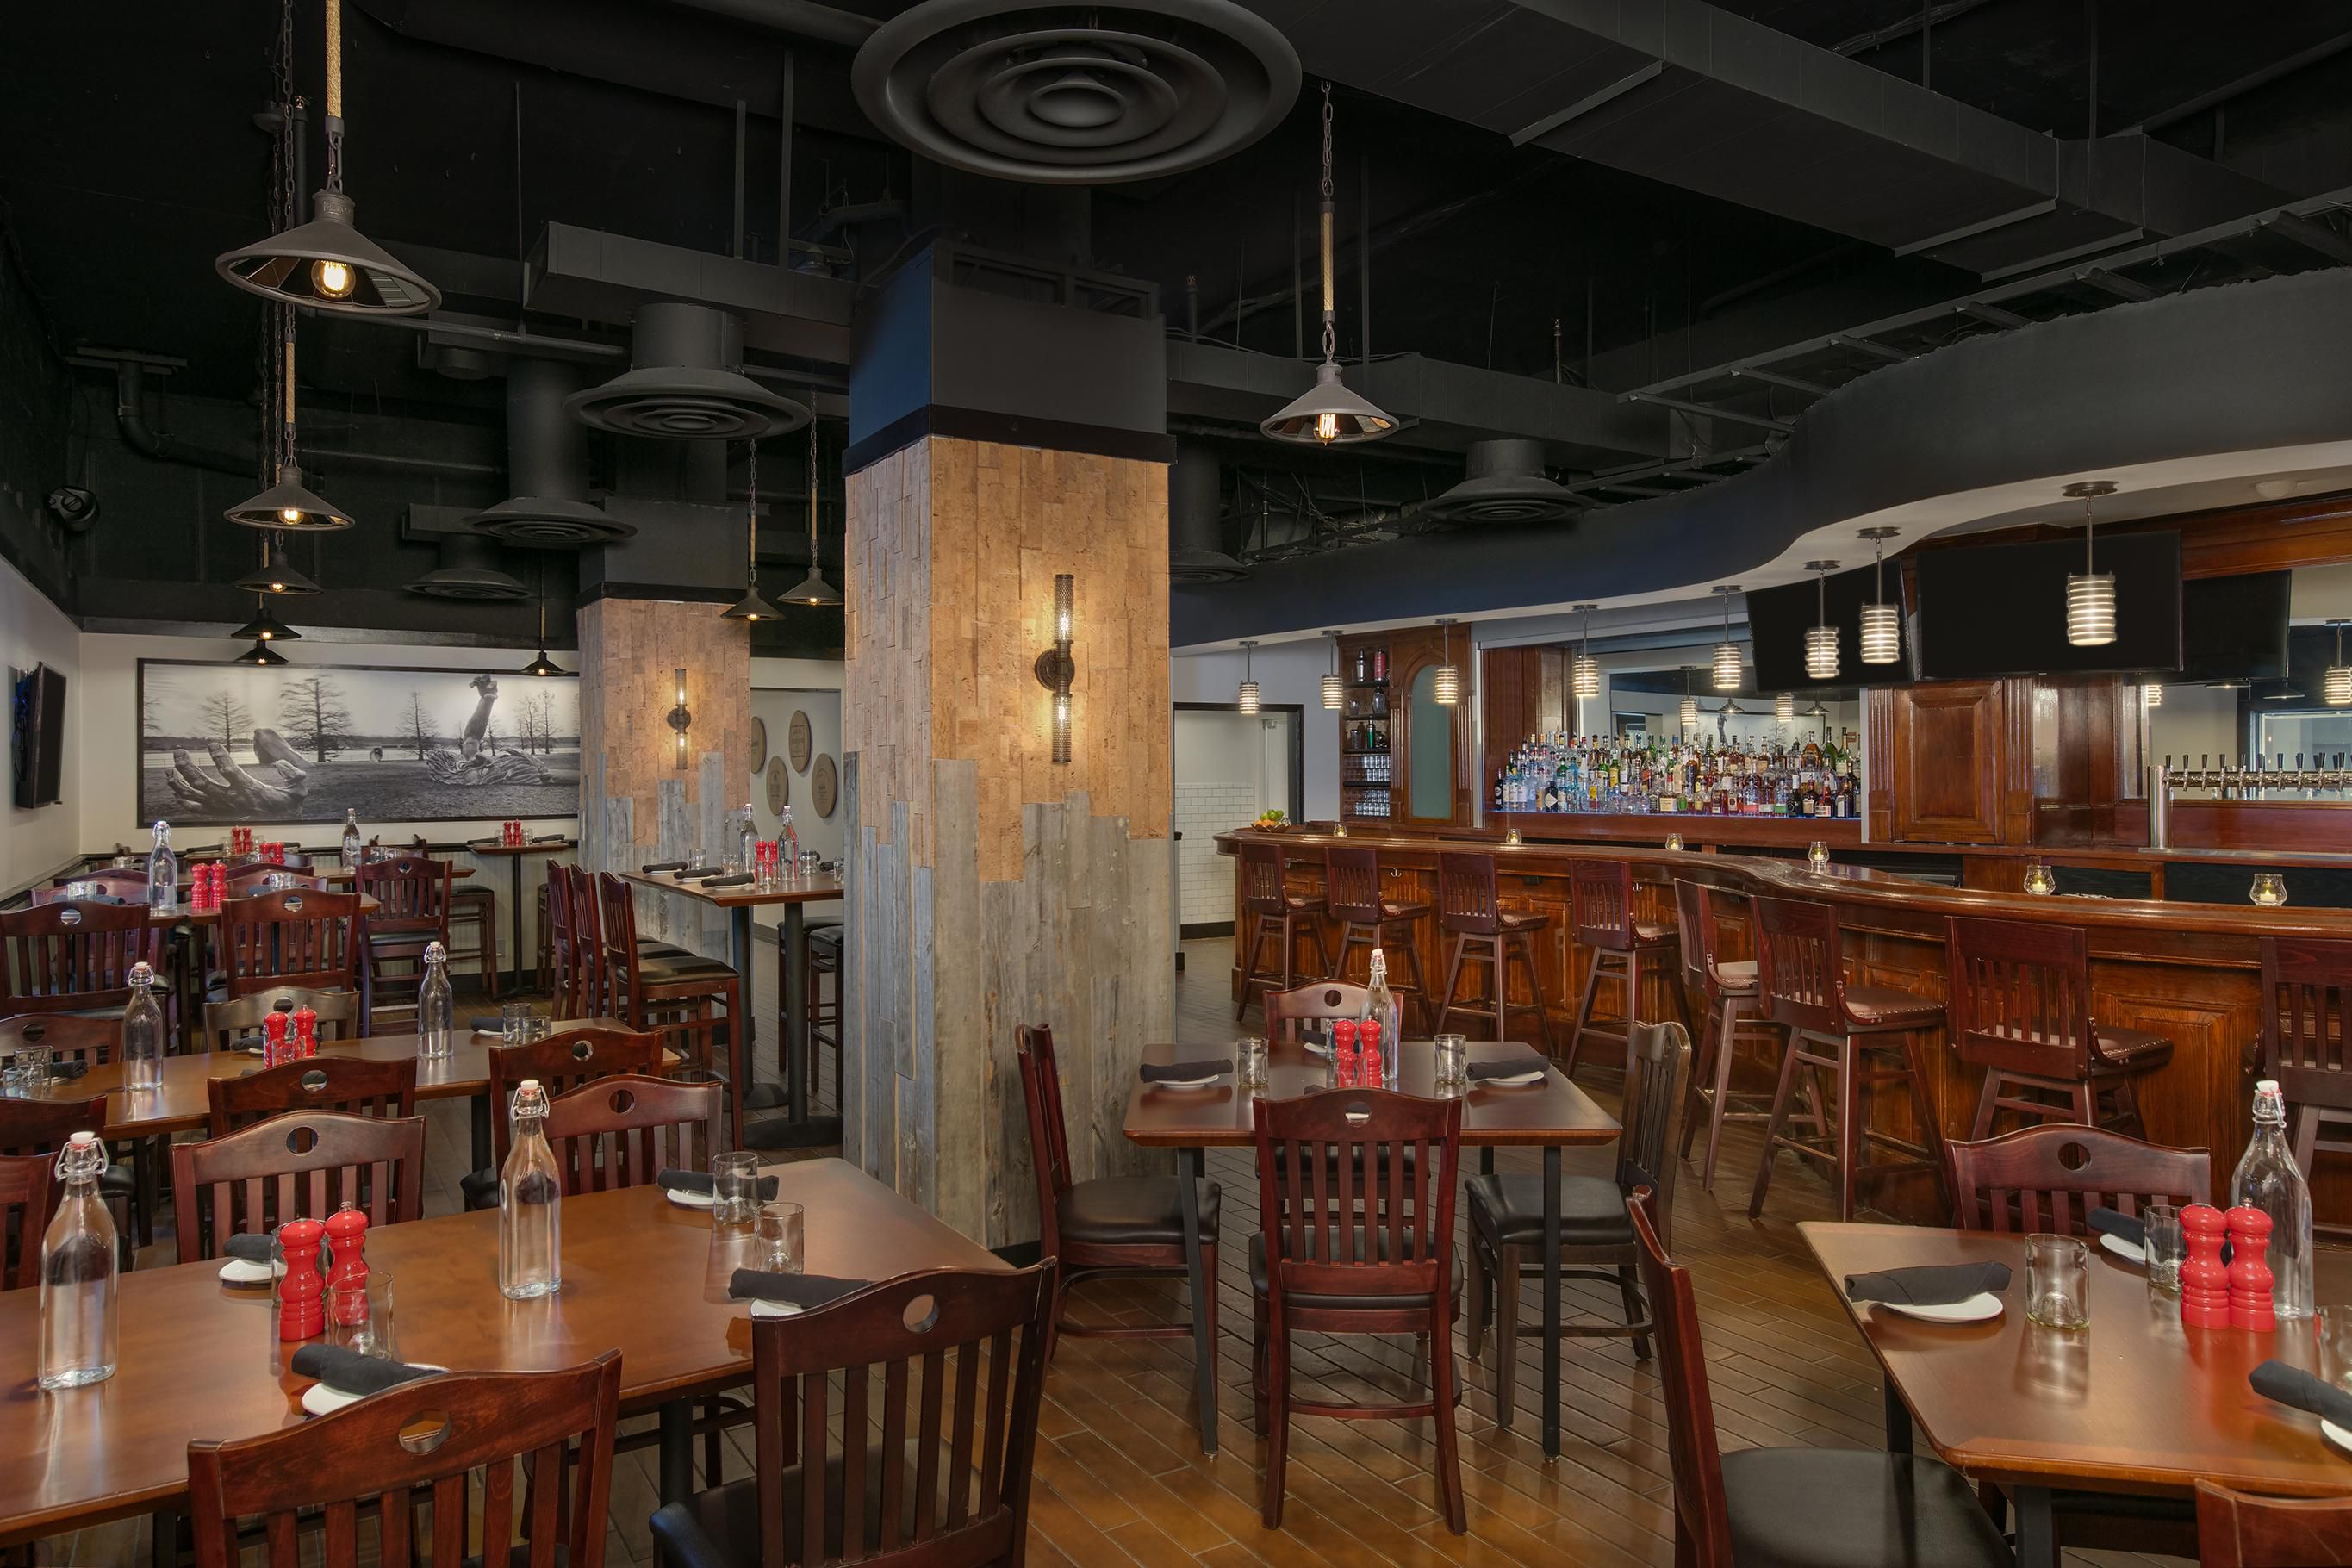 Enjoy American fare and an extensive tap list at our tavern.